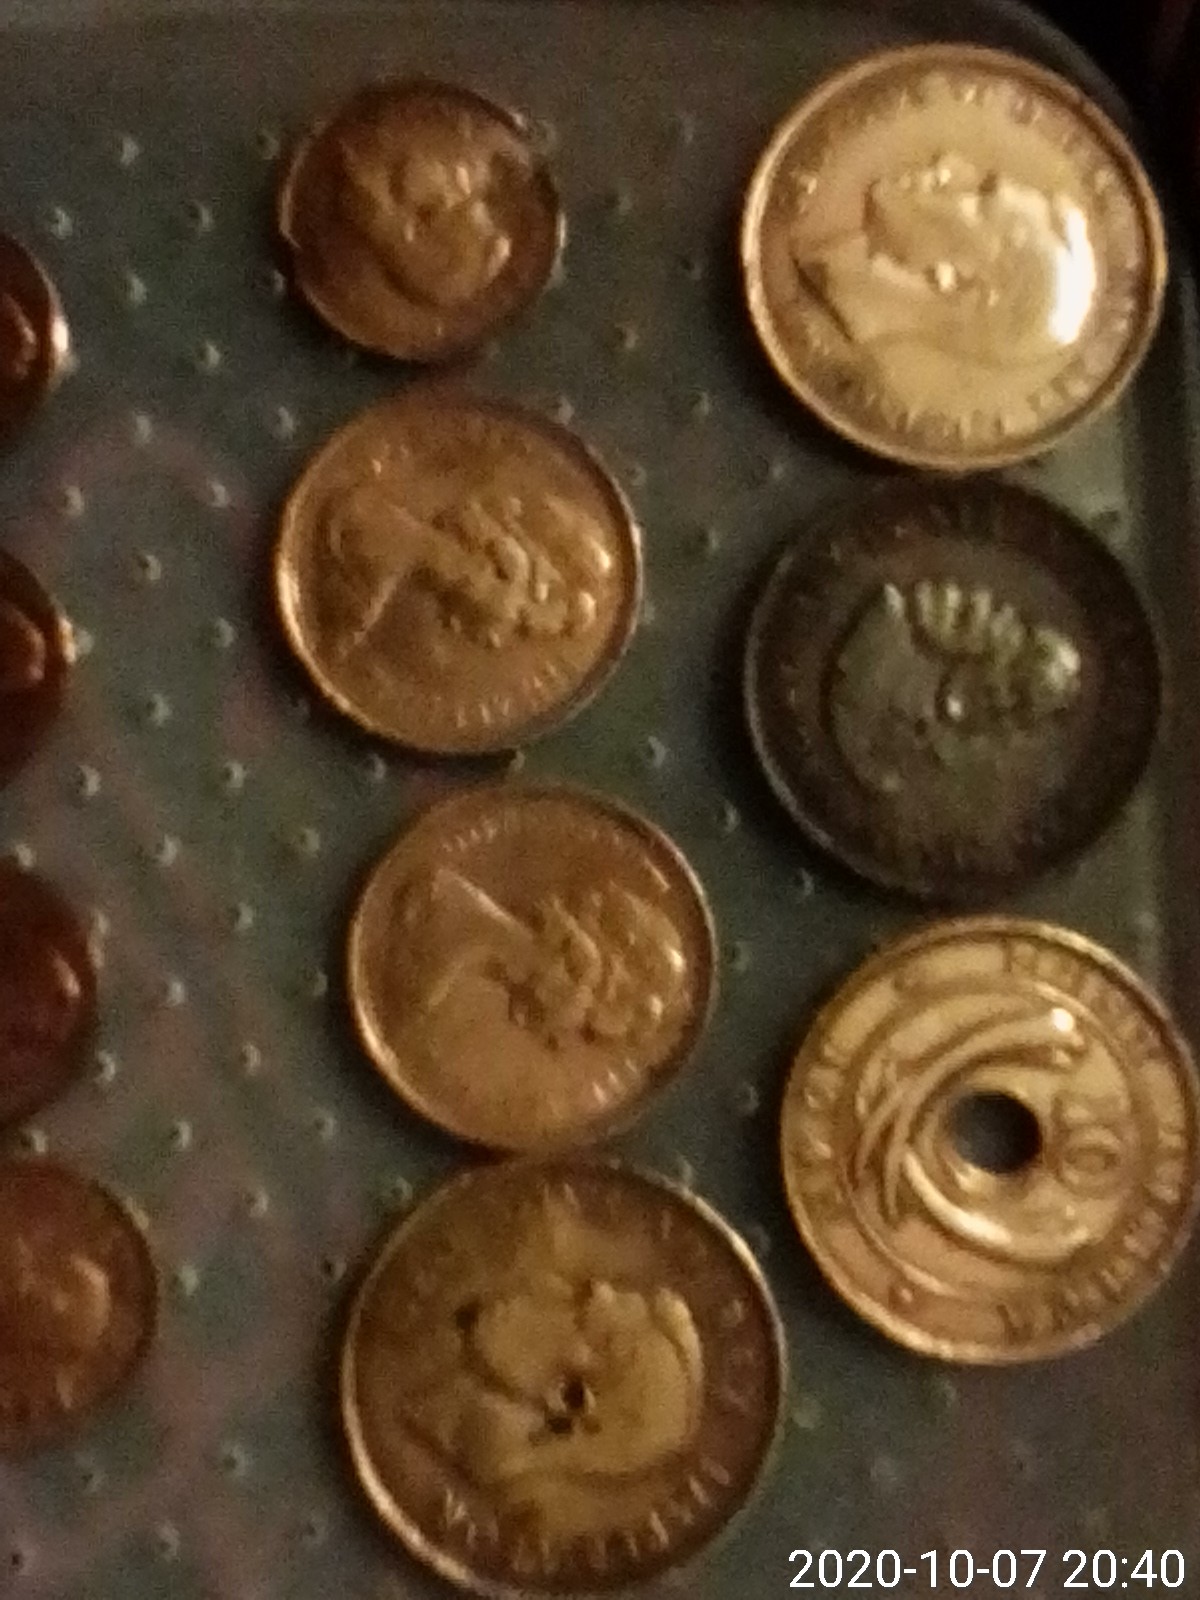 SA and foreign coins for sale